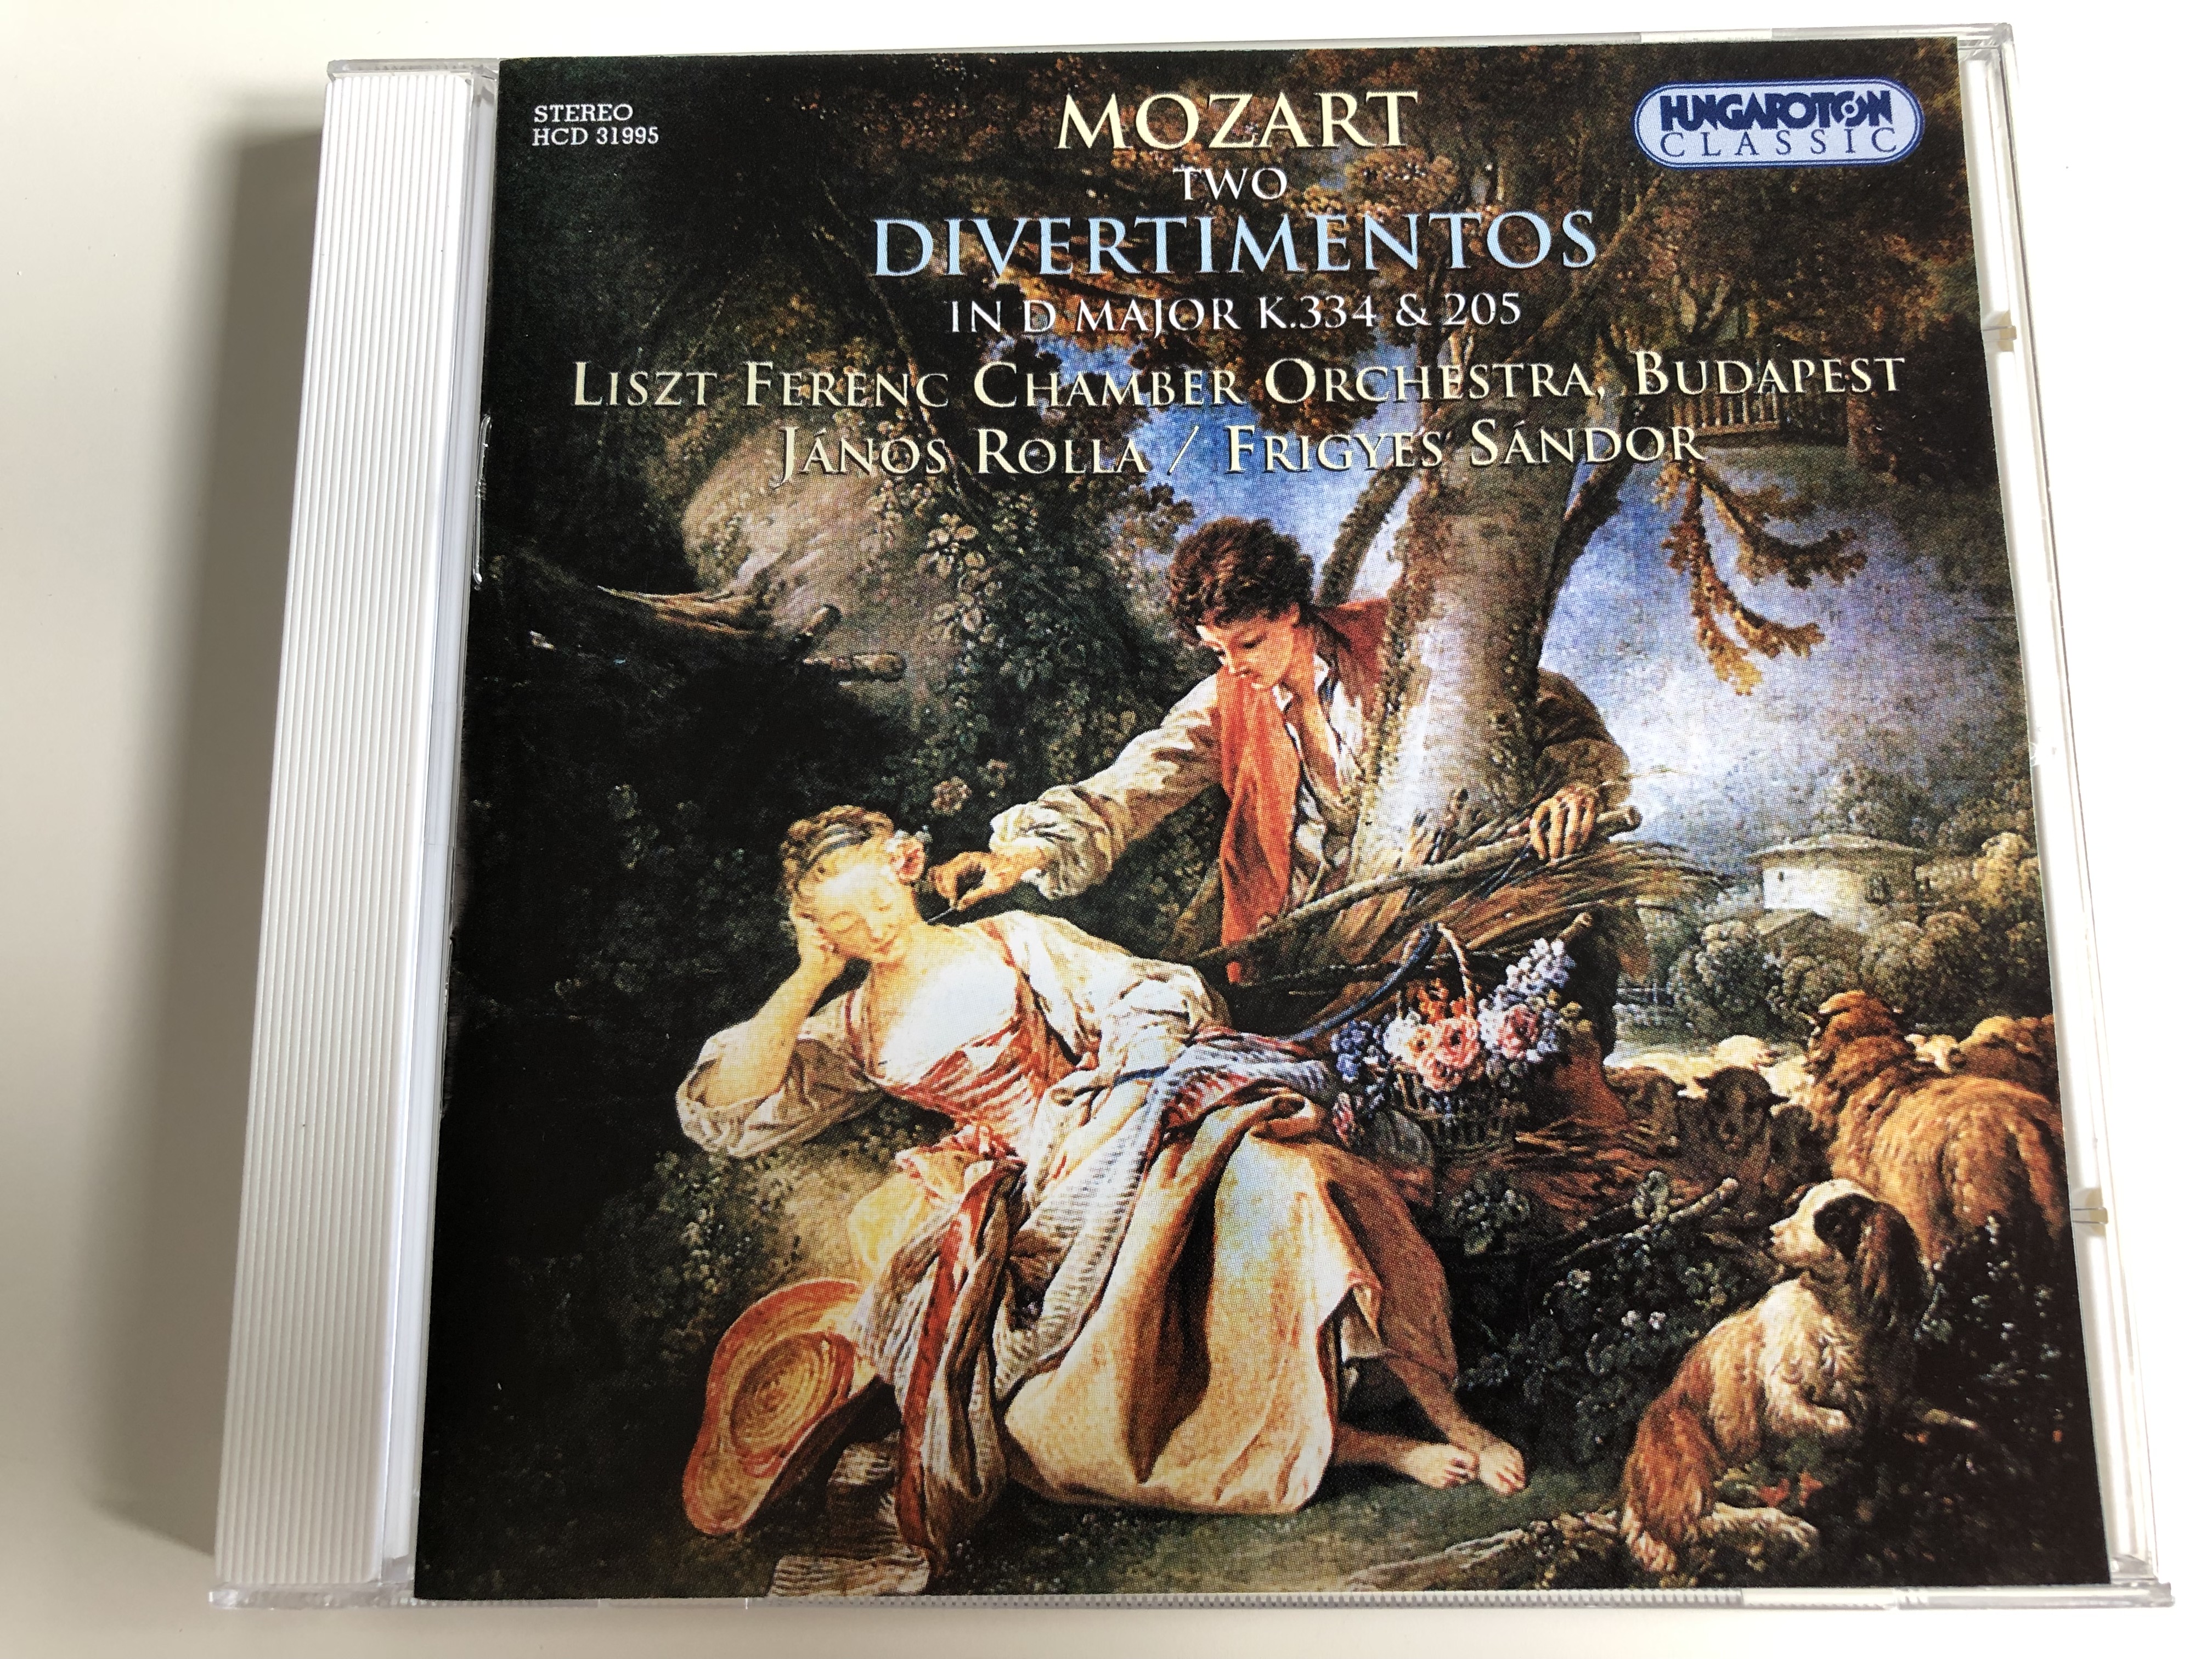 mozart-two-divertimentos-in-d-major-k.334-205-liszt-ferenc-chamber-orchestra-budapest-conducted-by-j-nos-rolla-frigyes-s-ndor-hungaroton-audio-cd-2002-hcd-31995-1-.jpg